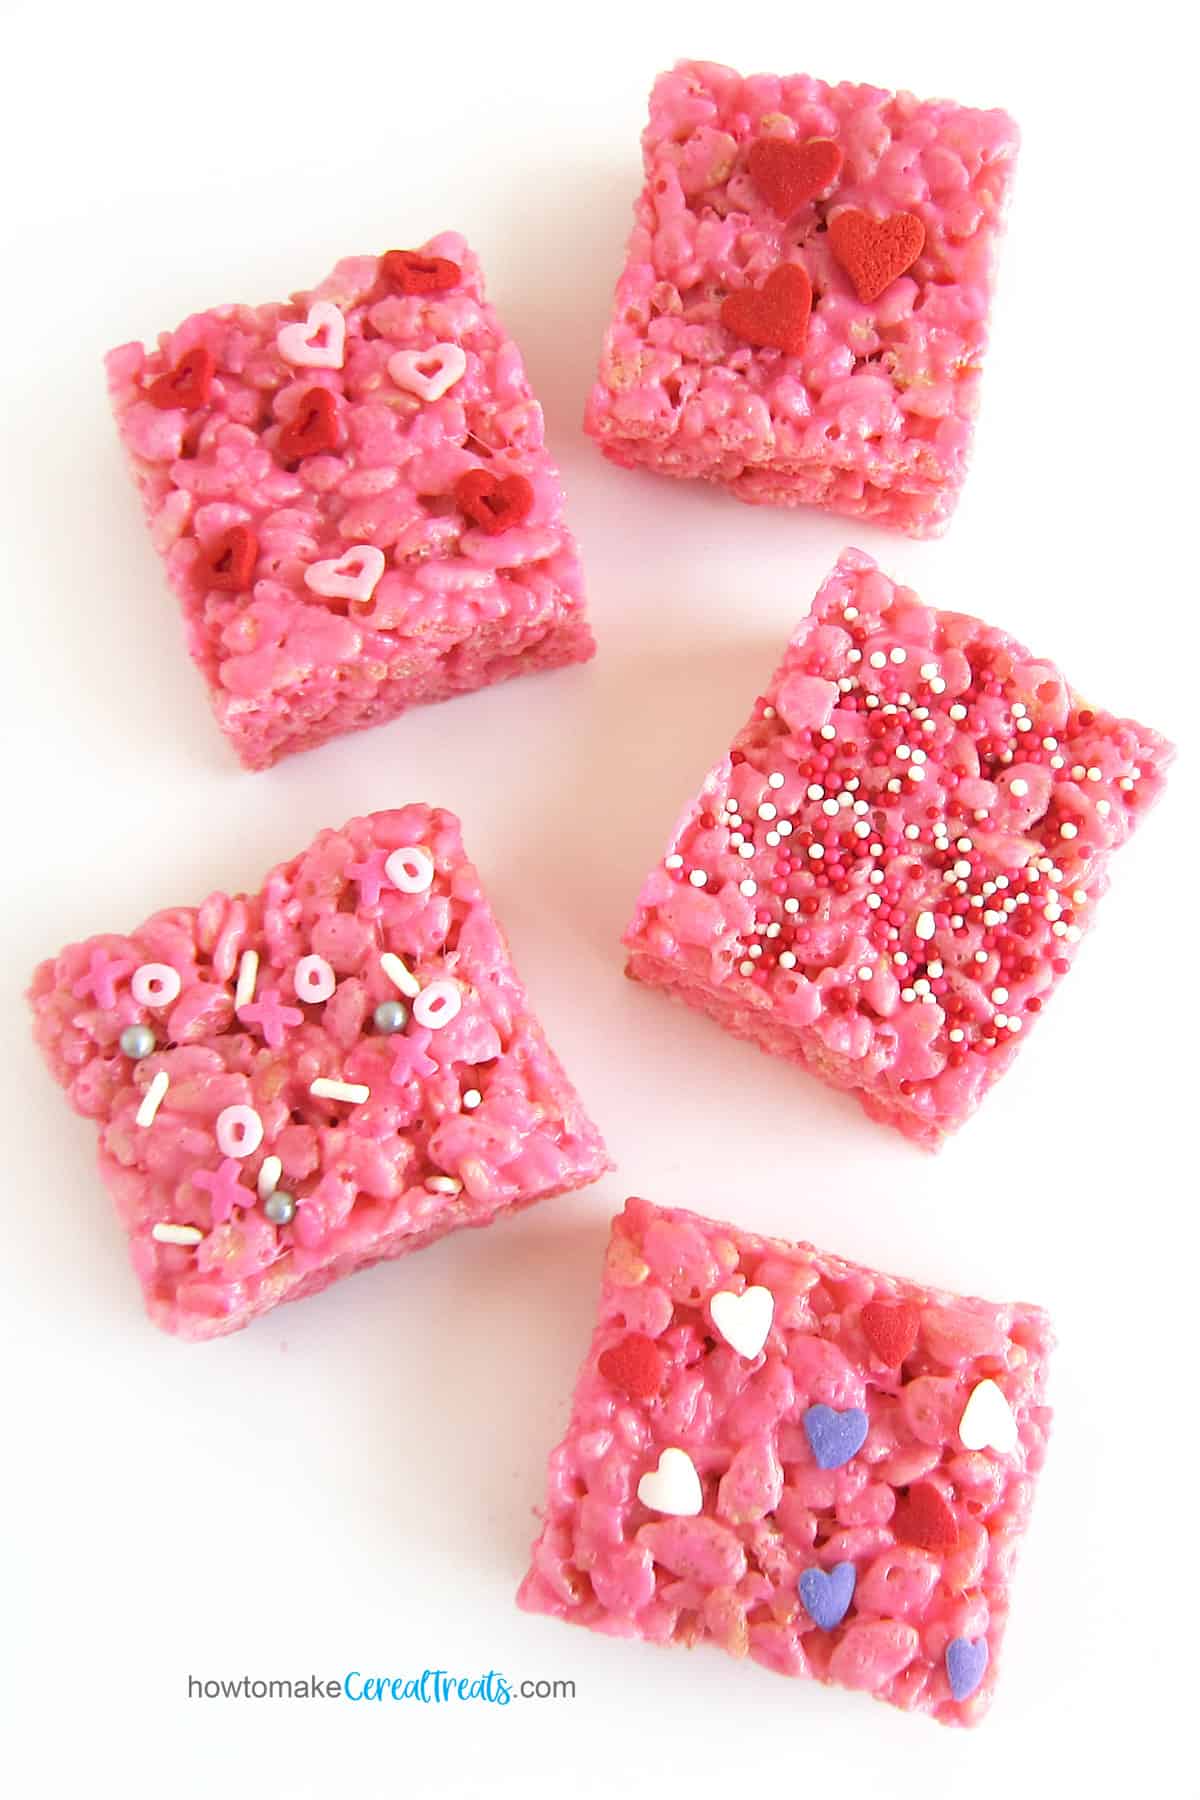 pink Rice Krispie Treats topped with Valentine's Day sprinkles